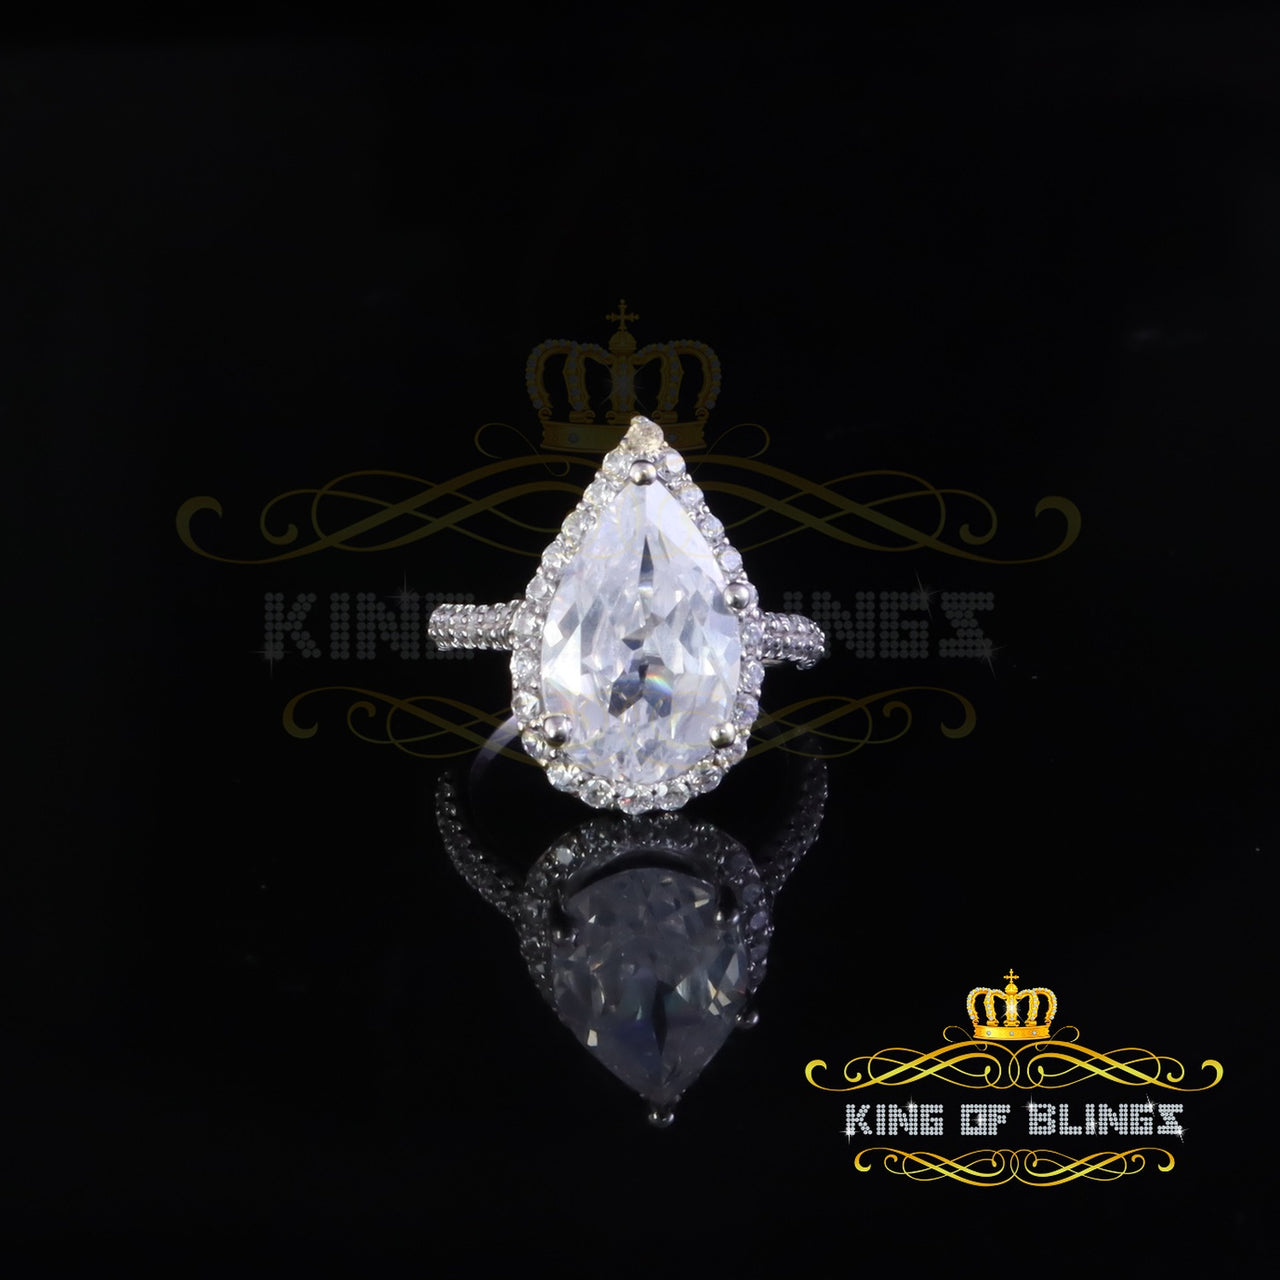 King Of Bling's925 Silver Pear Shaped Cubic Zirconia For Women's White Engagement Ring Size 09 KING OF BLINGS